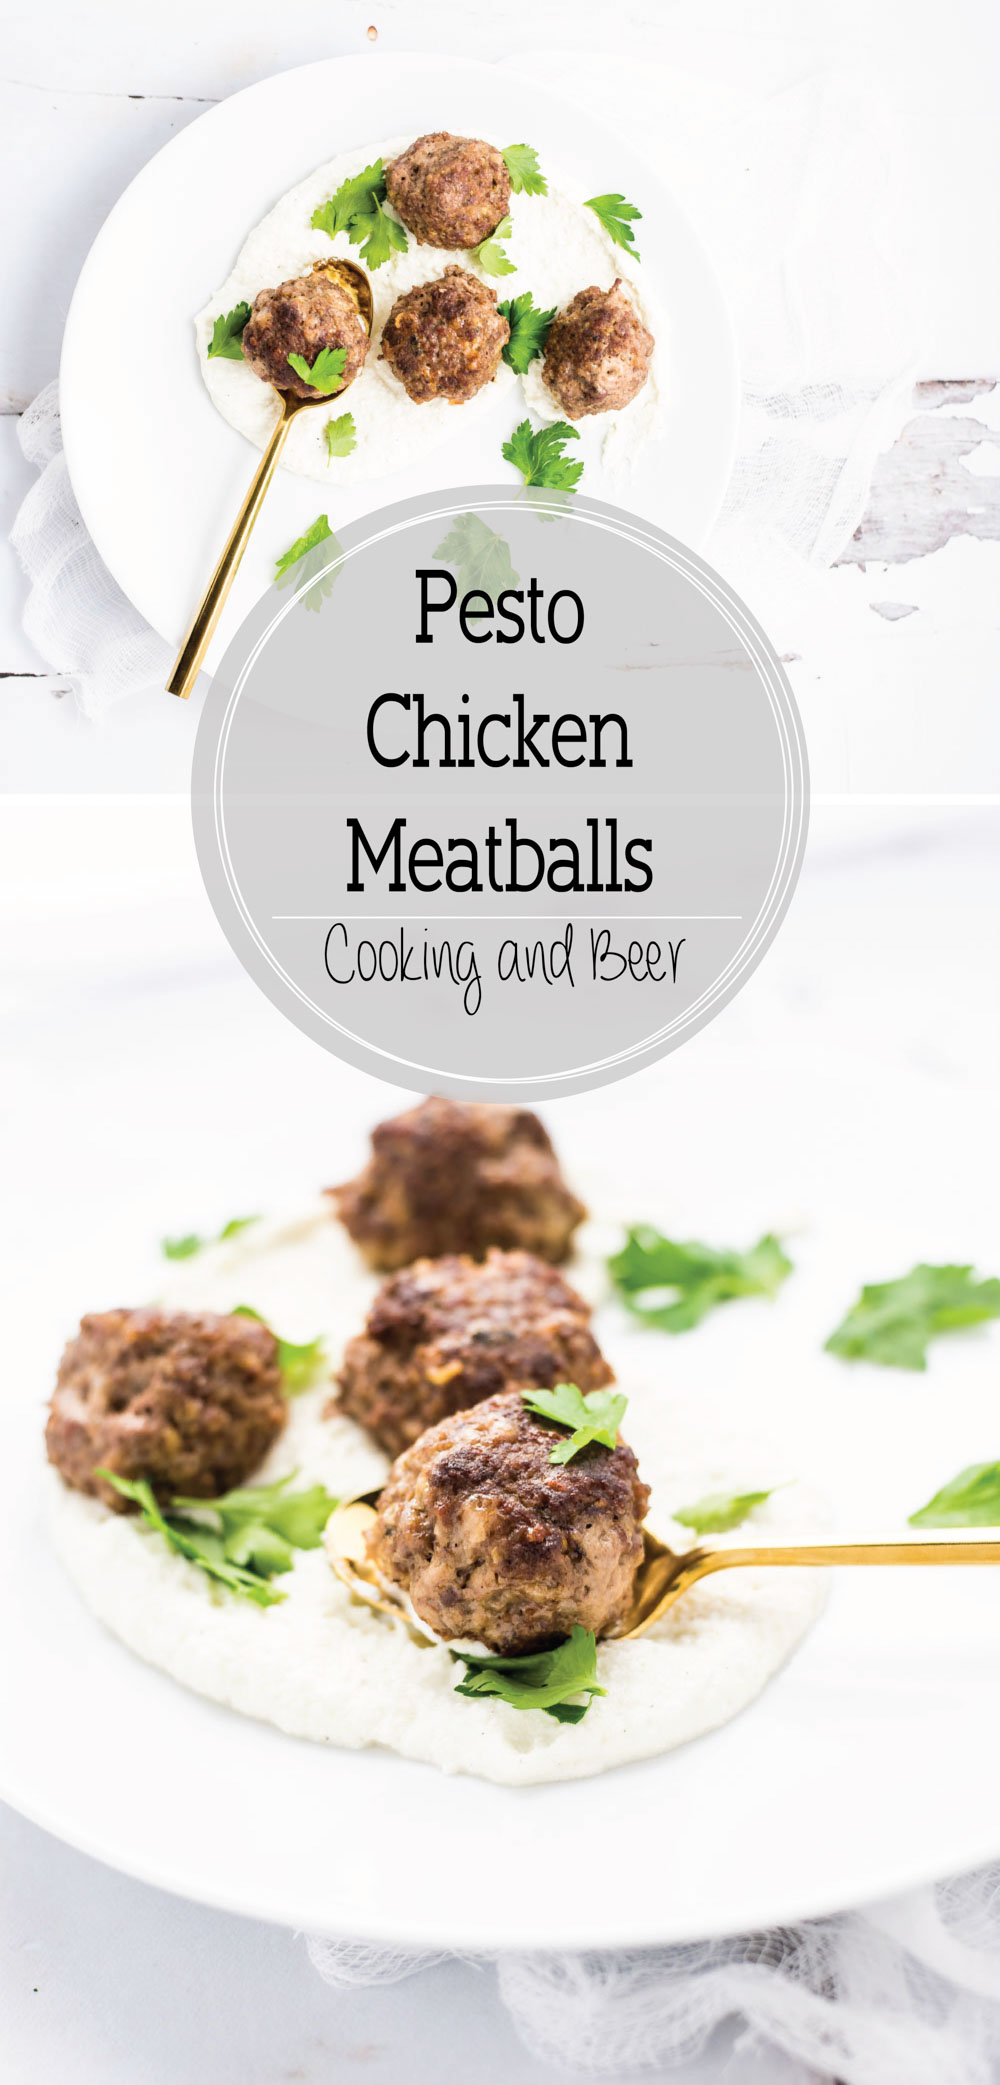 Pesto Chicken Meatballs represent a recipe that's perfect for an elegant dinner party or a quick weeknight meal!